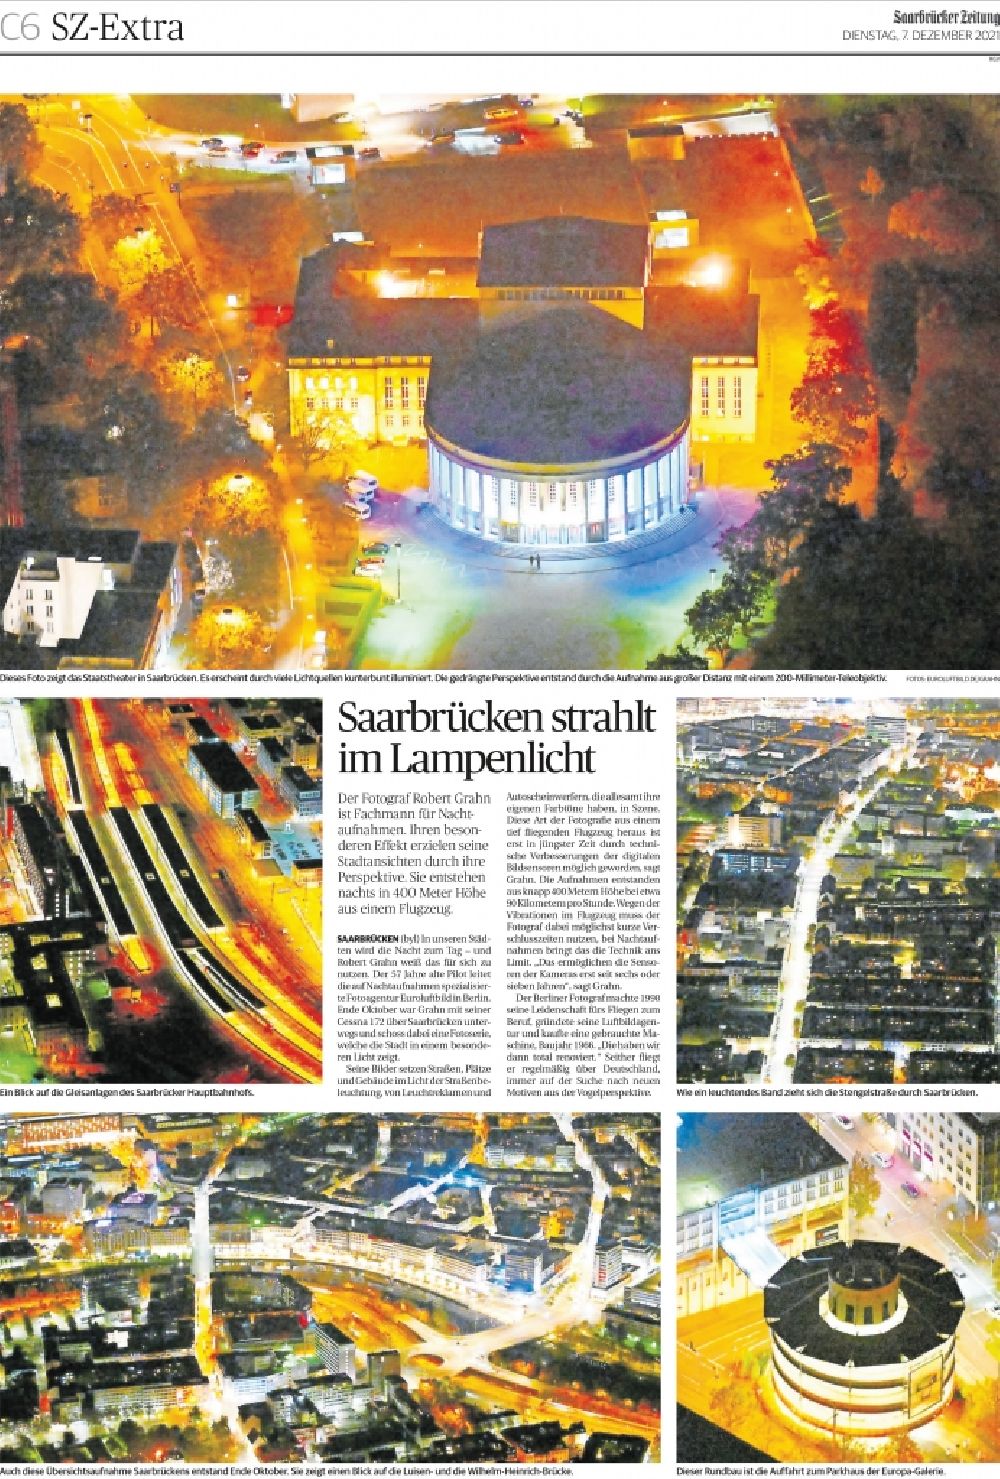 Aerial image Saarbrücken - Picture Section / media use of aerial use in the Newspaper - daily paper Saarbruecker Zeitung page C6 SZ-Extra, added to in Saarbruecken in the state Saarland, Germany